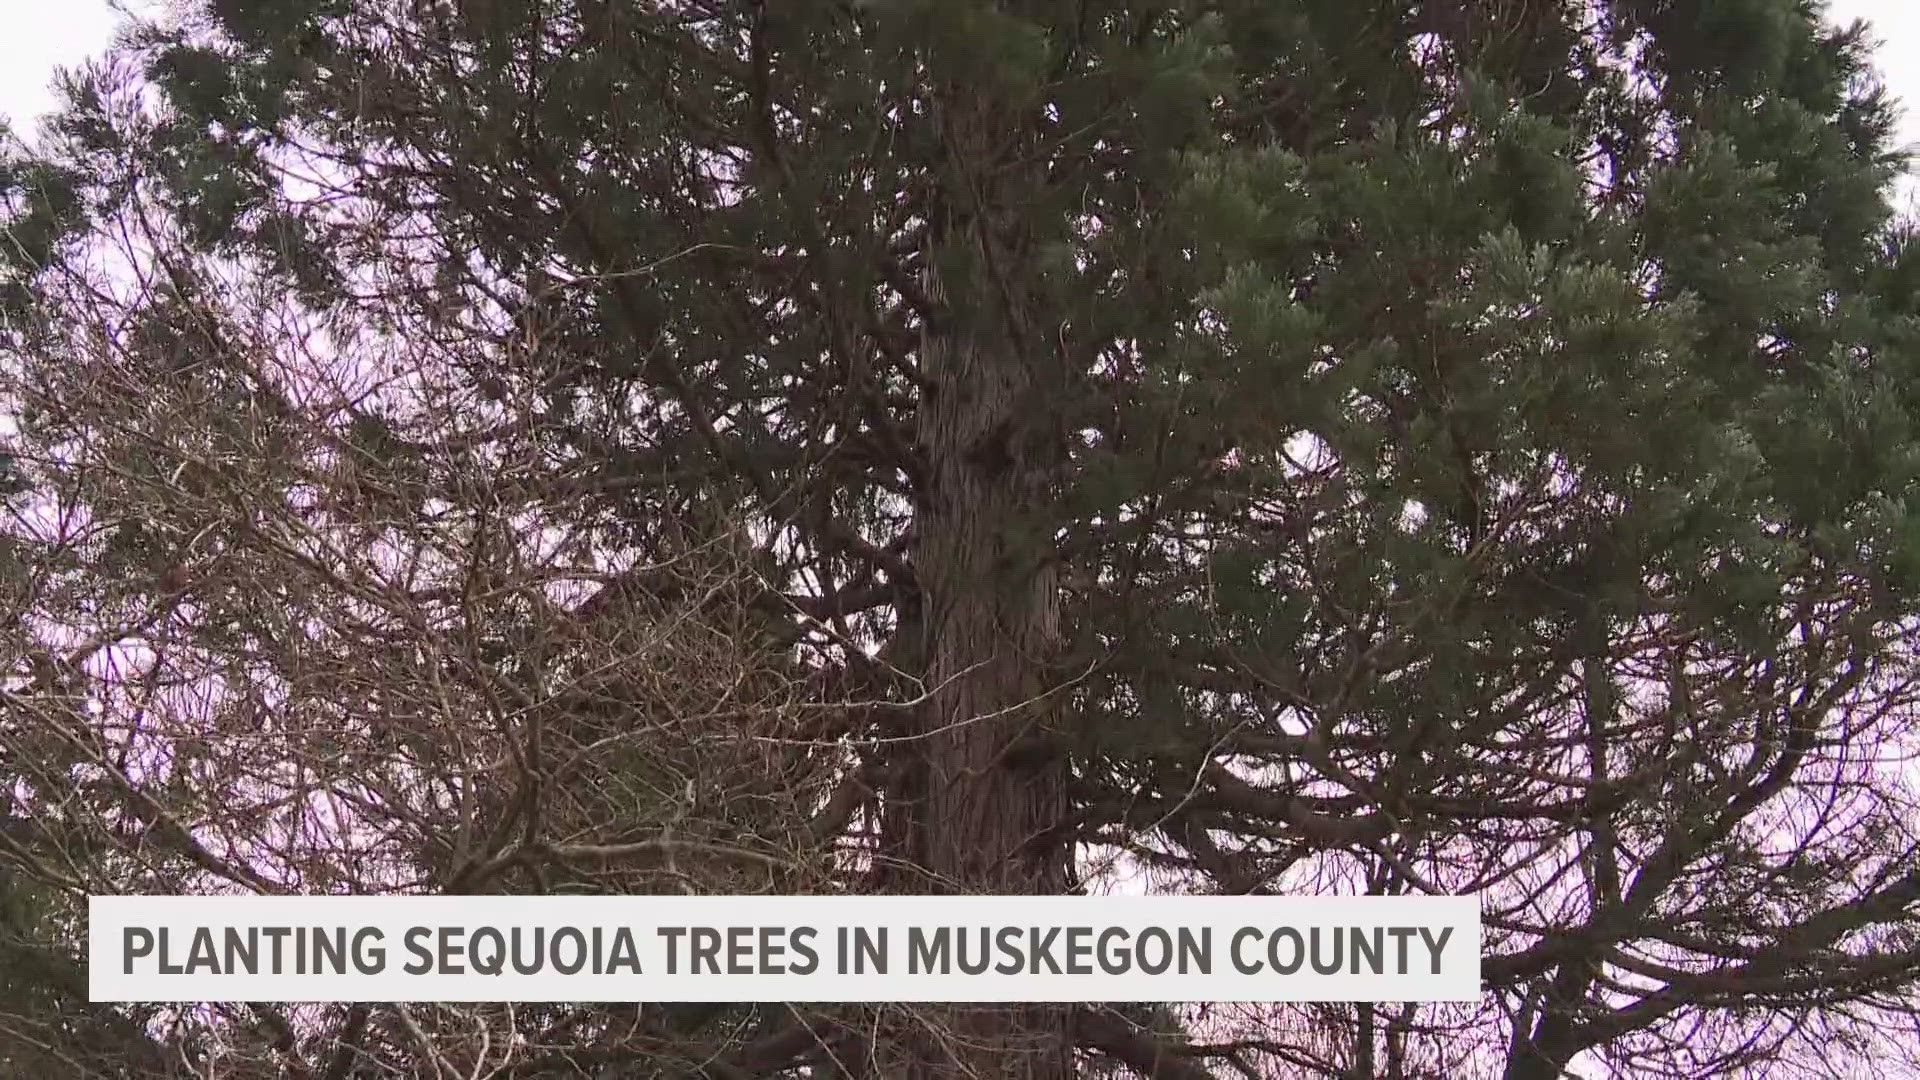 The collective has planted an estimated 500 sequoia trees so far. A fundraiser dubbed "Shiba Fest" is happening Sept. 1-2 in Muskegon to support the cause.